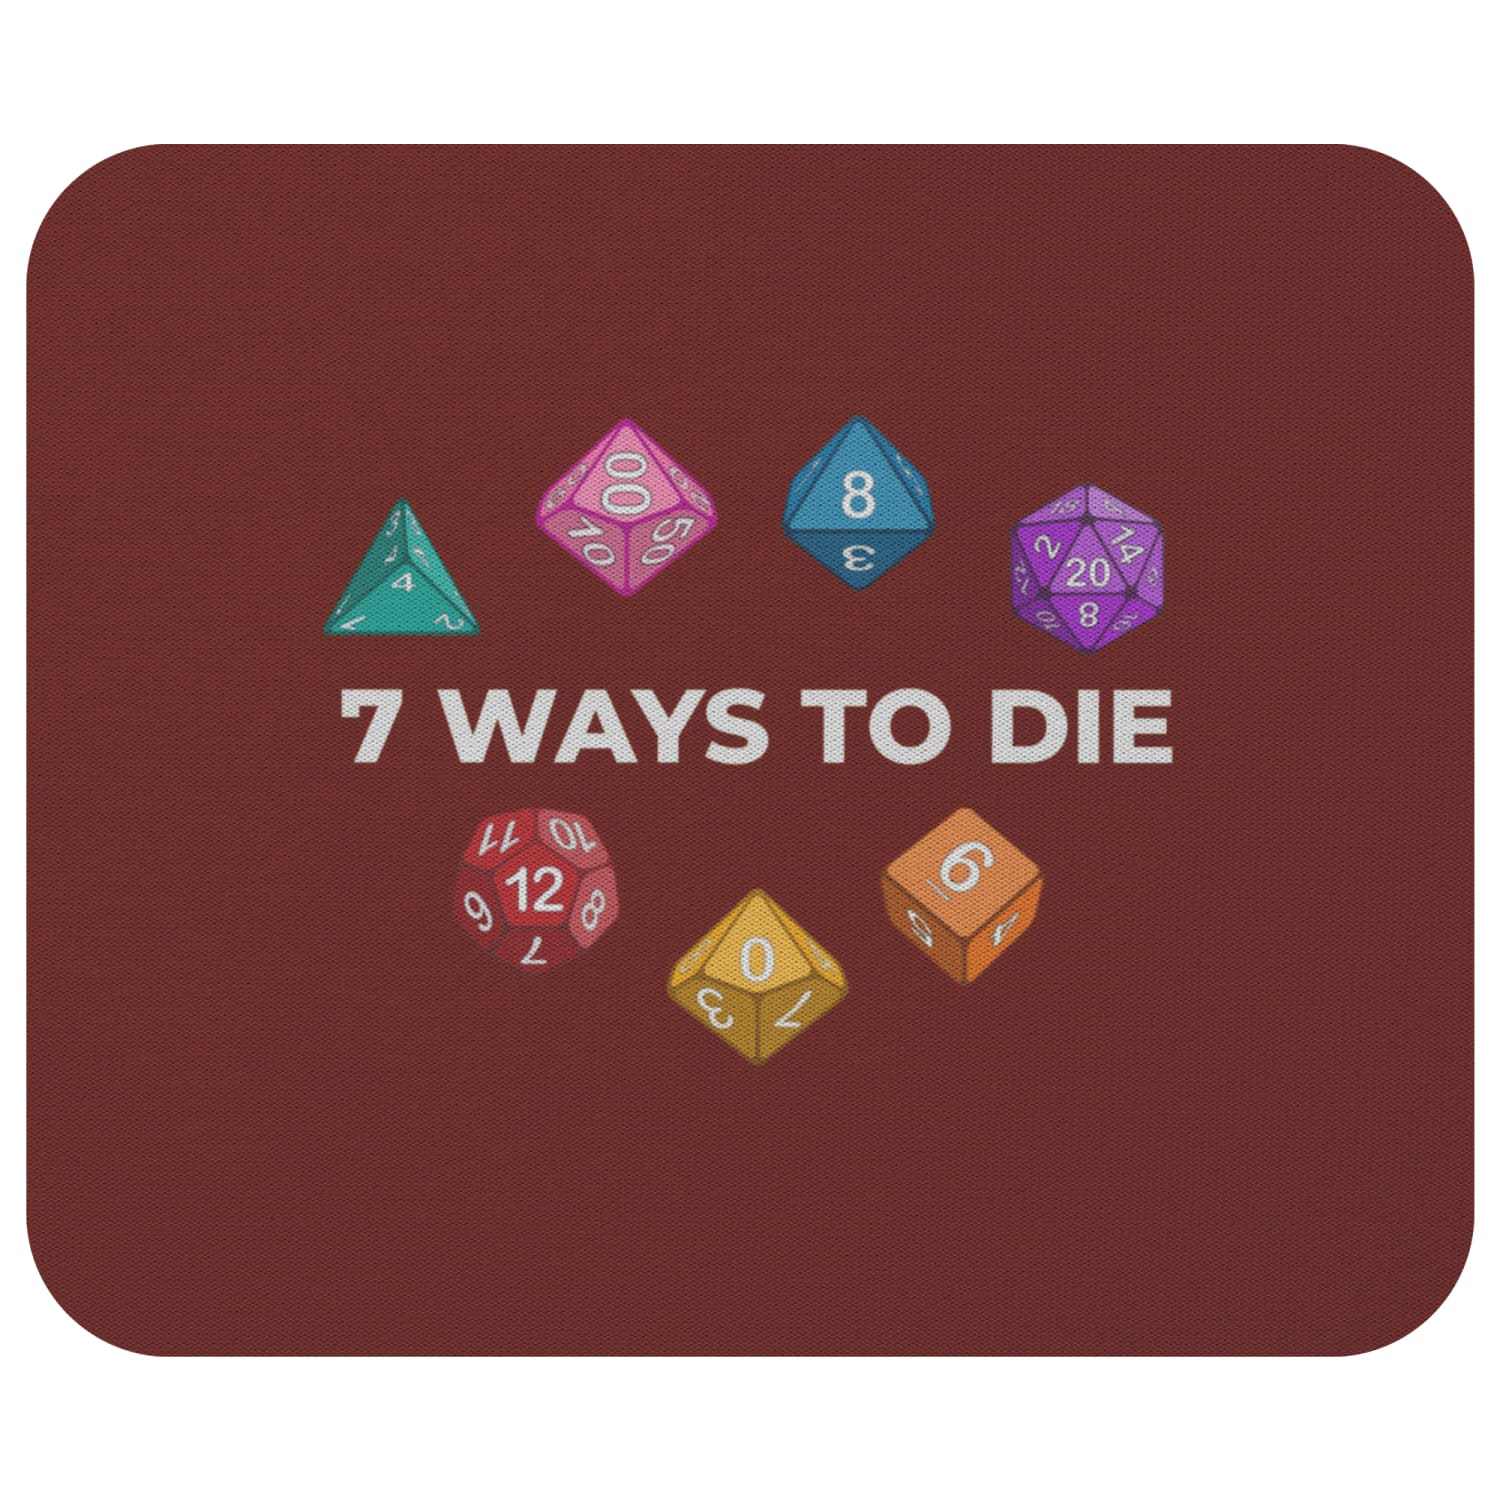 7 Ways To Die Mousepad - 7WRed - Mousepads